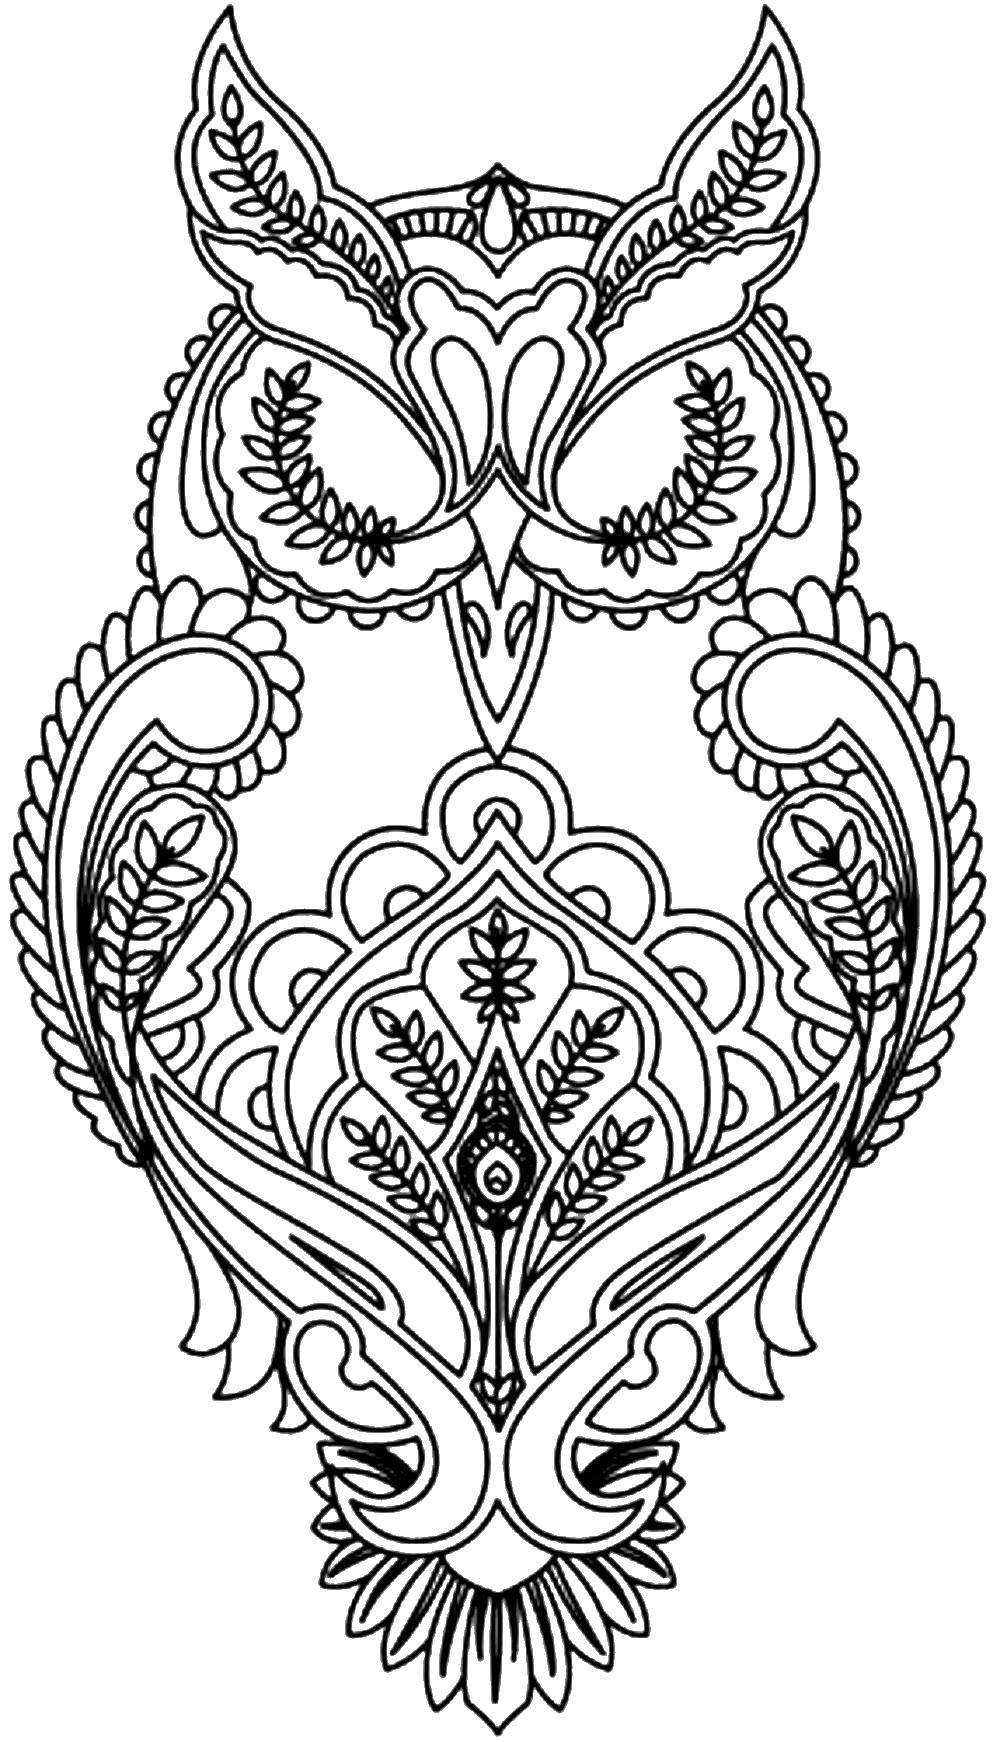 Coloring Patterned owl. Category birds. Tags:  birds, owls, owl patterns.